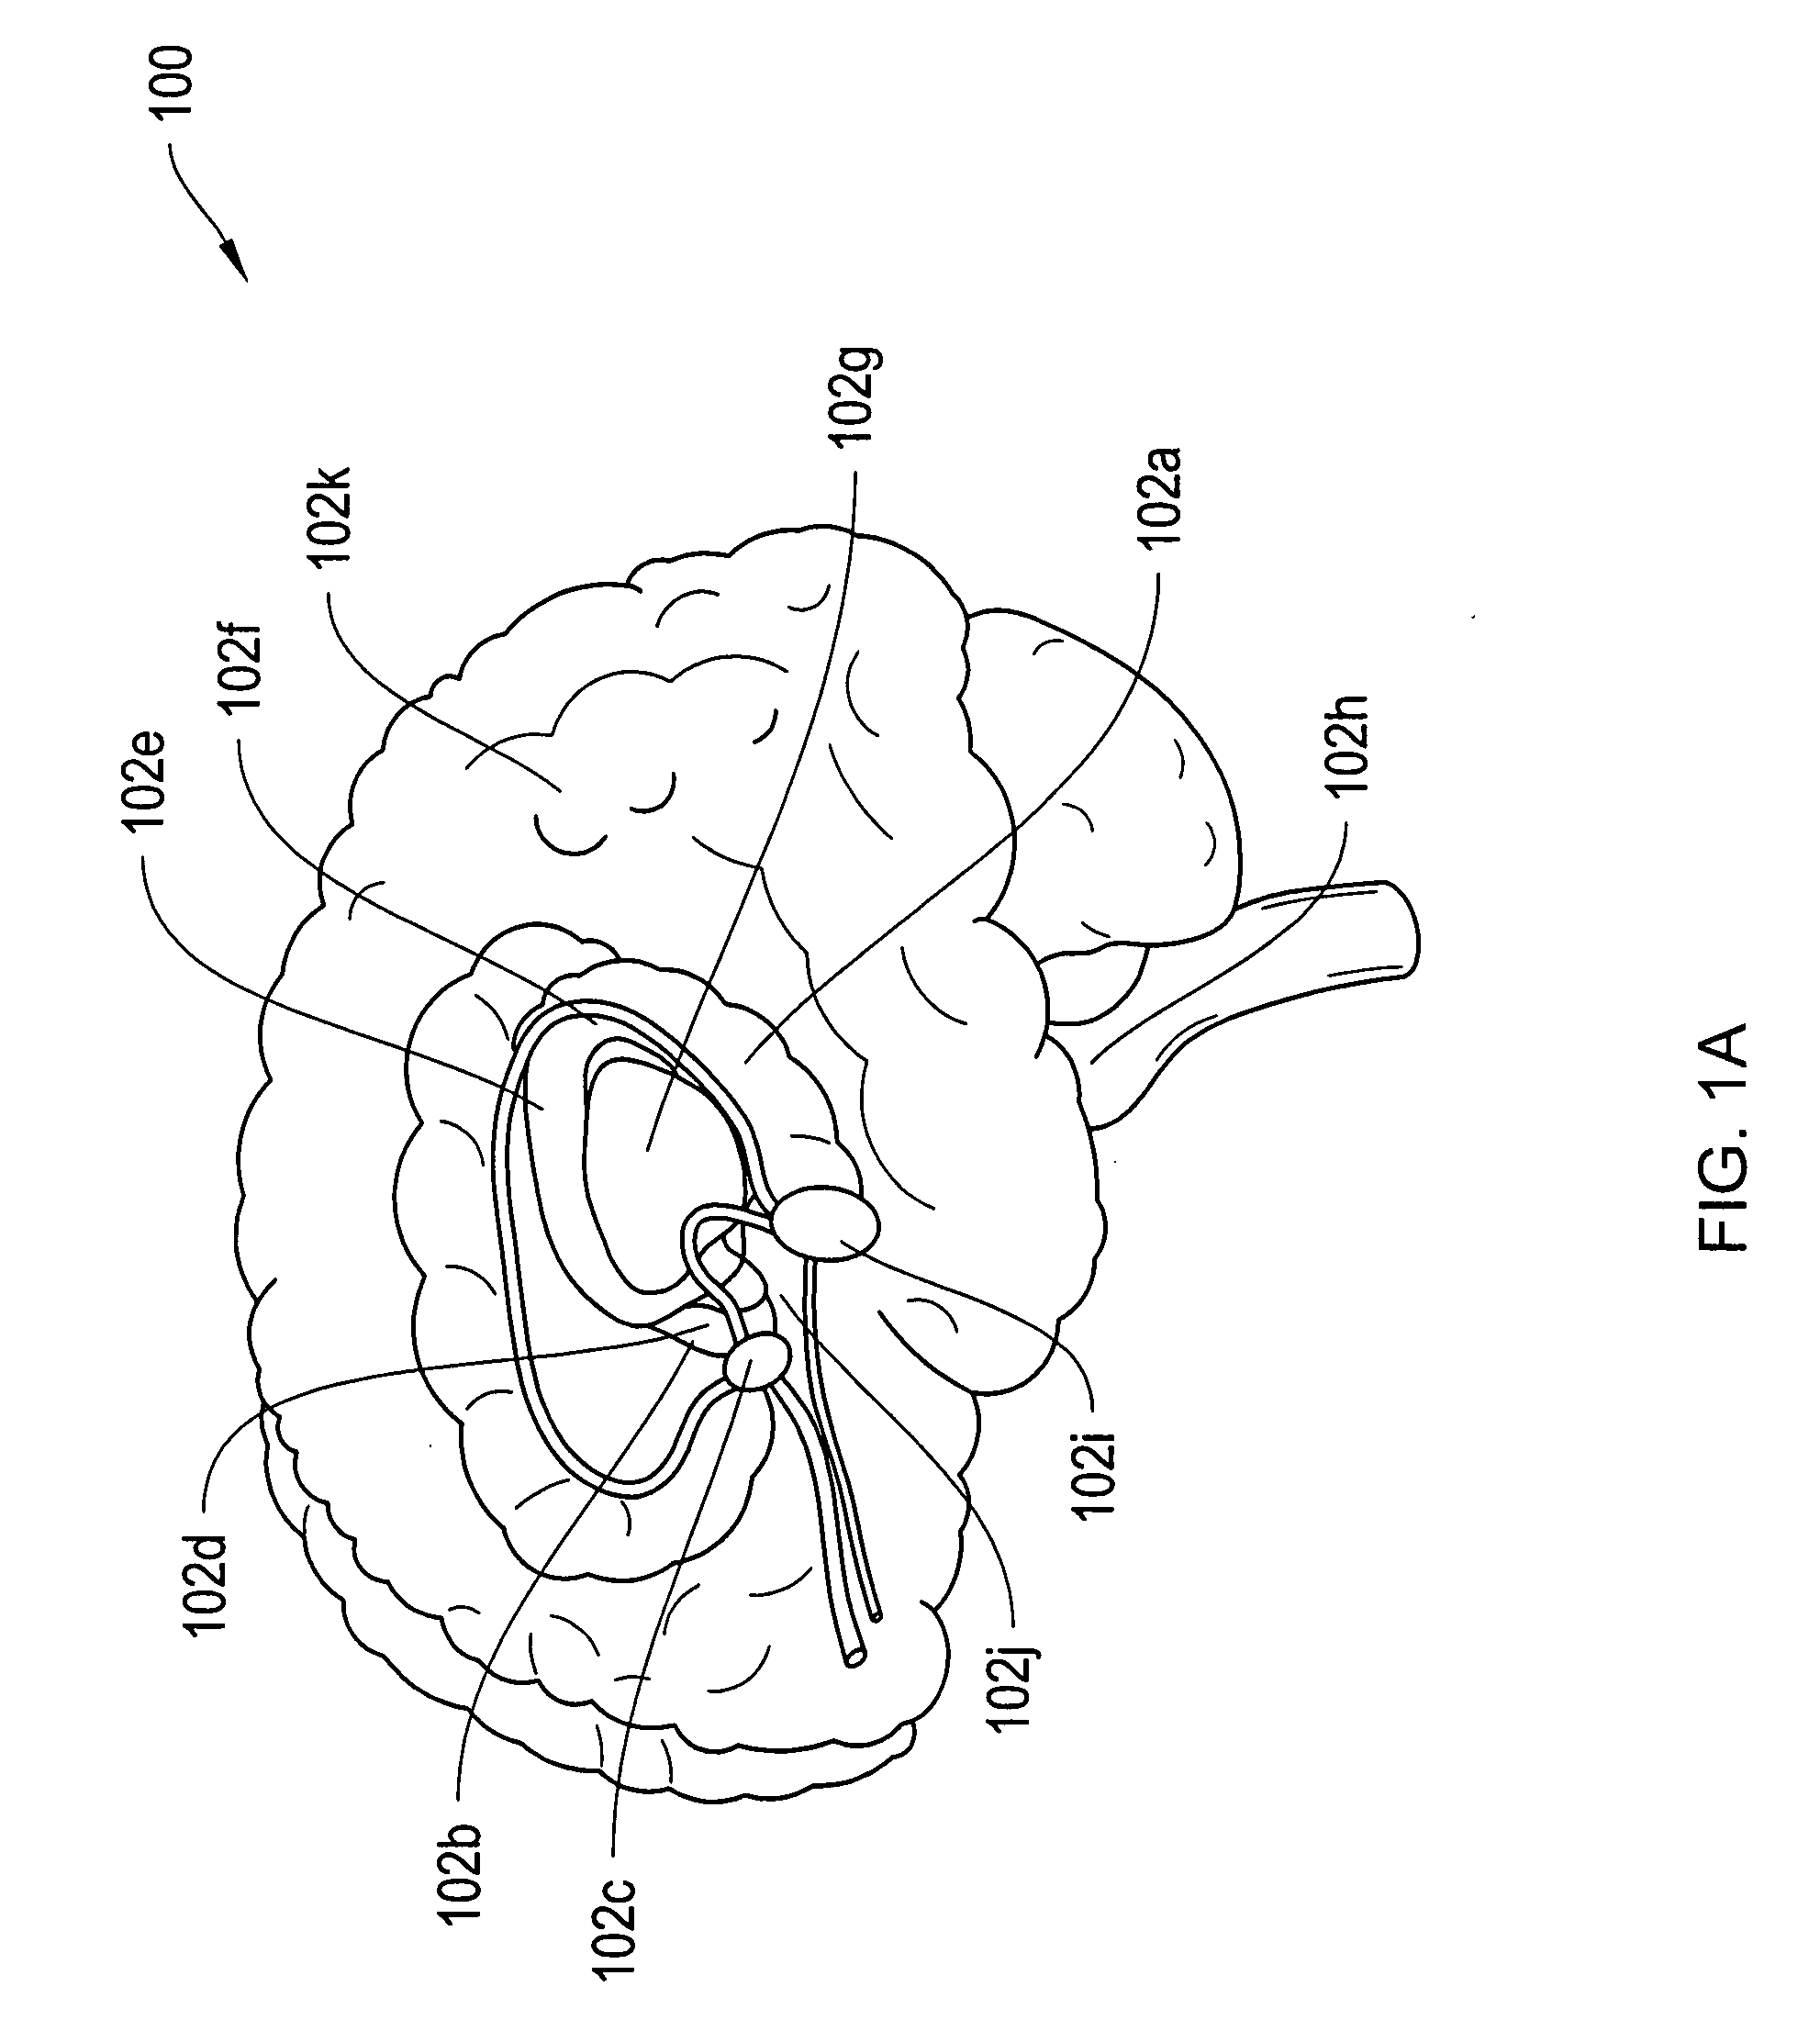 Systems and methods for improving a cognitive function